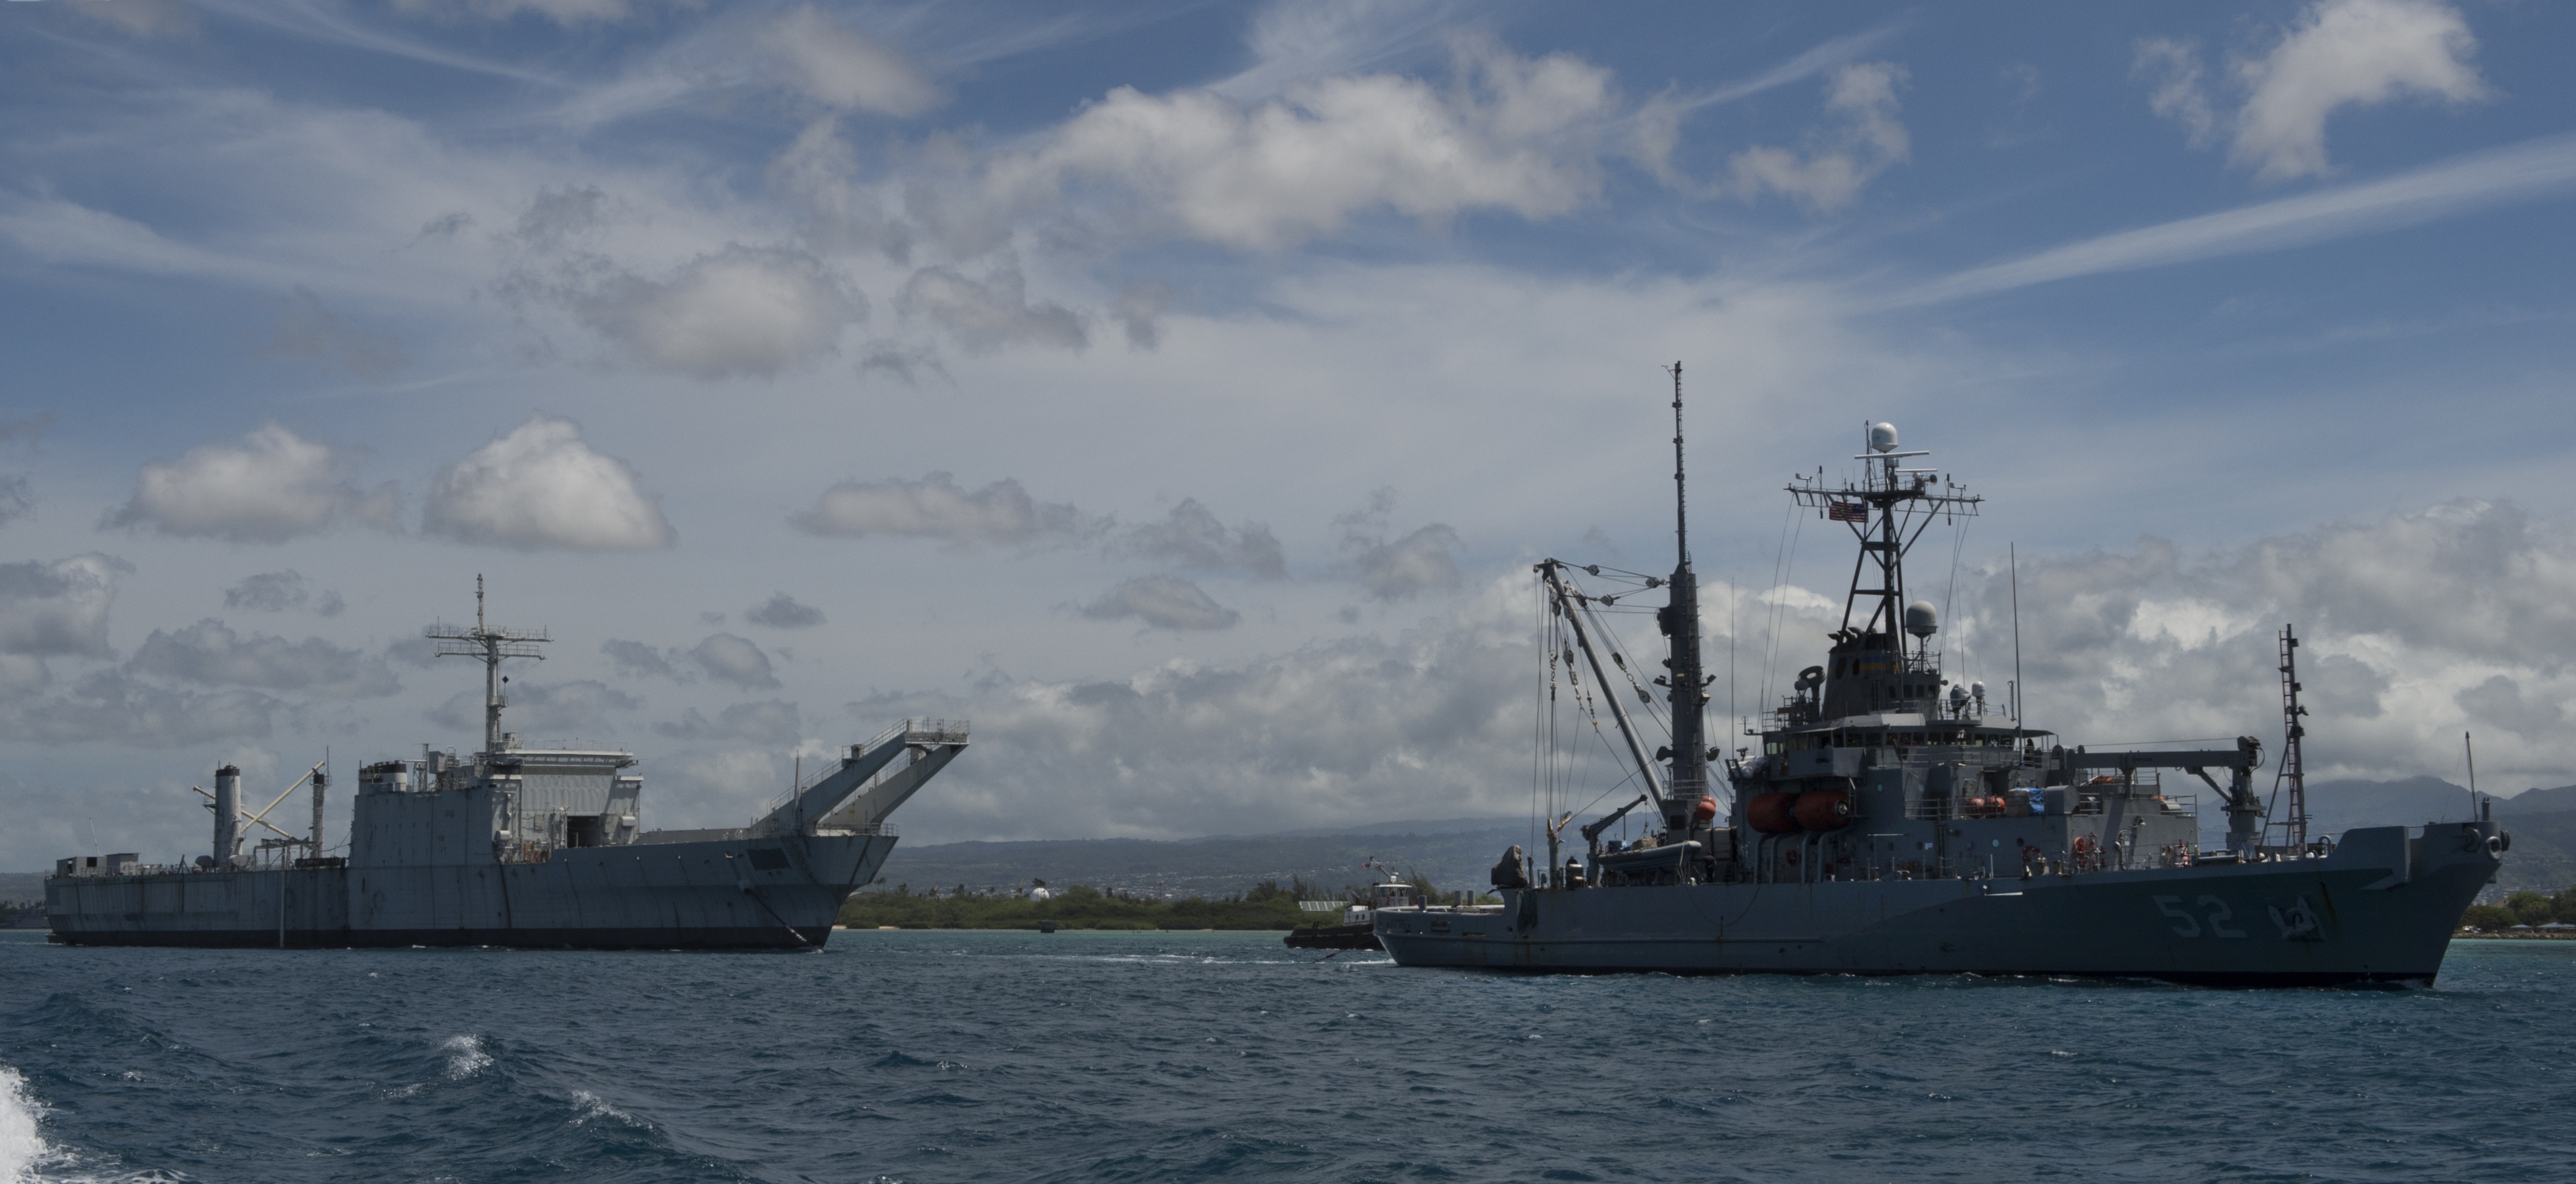 File:USNS Salvor (T-ARS-52) tows USS Tuscaloosa (LST-1187) from